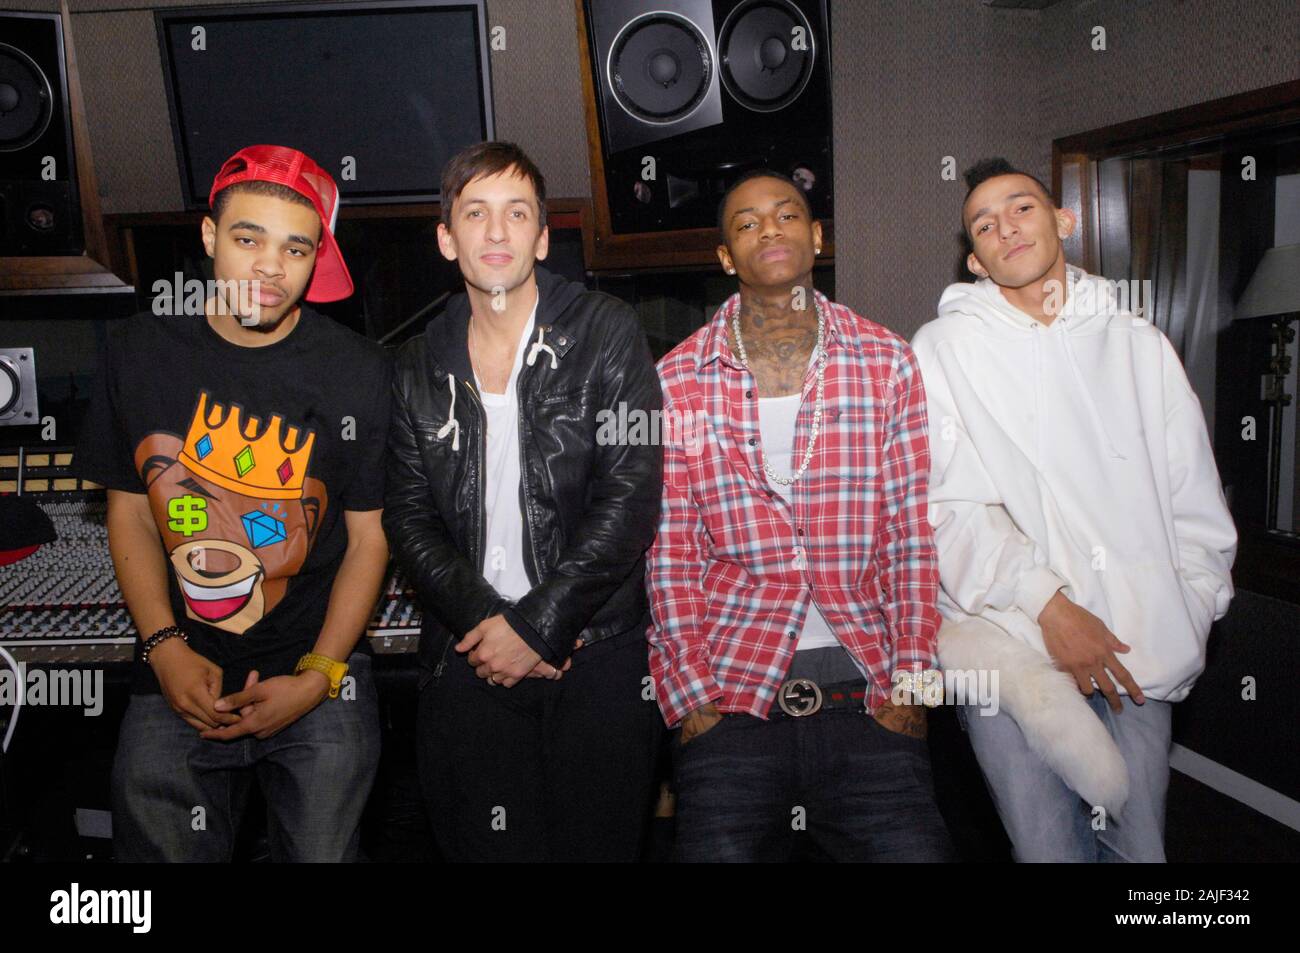 (L-R) Producers Bei Maejor, Clinton Sparks, Rapper Deandre Way aka Soulja Boy and Khleo T at a recording studio on February 5, 2010 in Los Angeles, California. Stock Photo